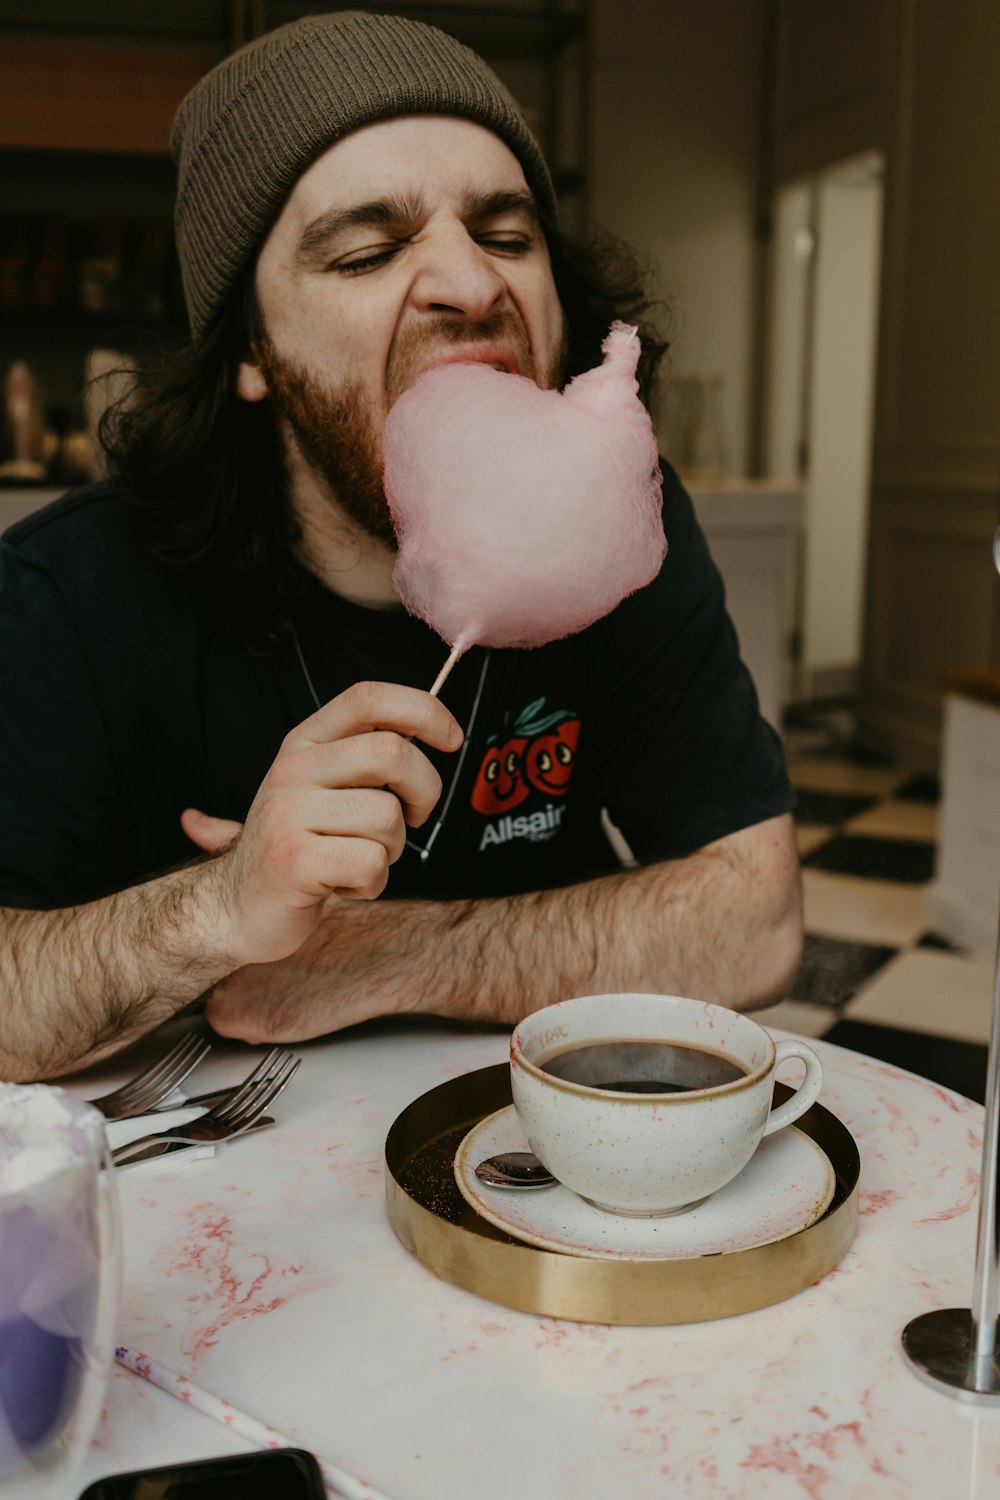 a man sitting at a table eating a pink lollipop